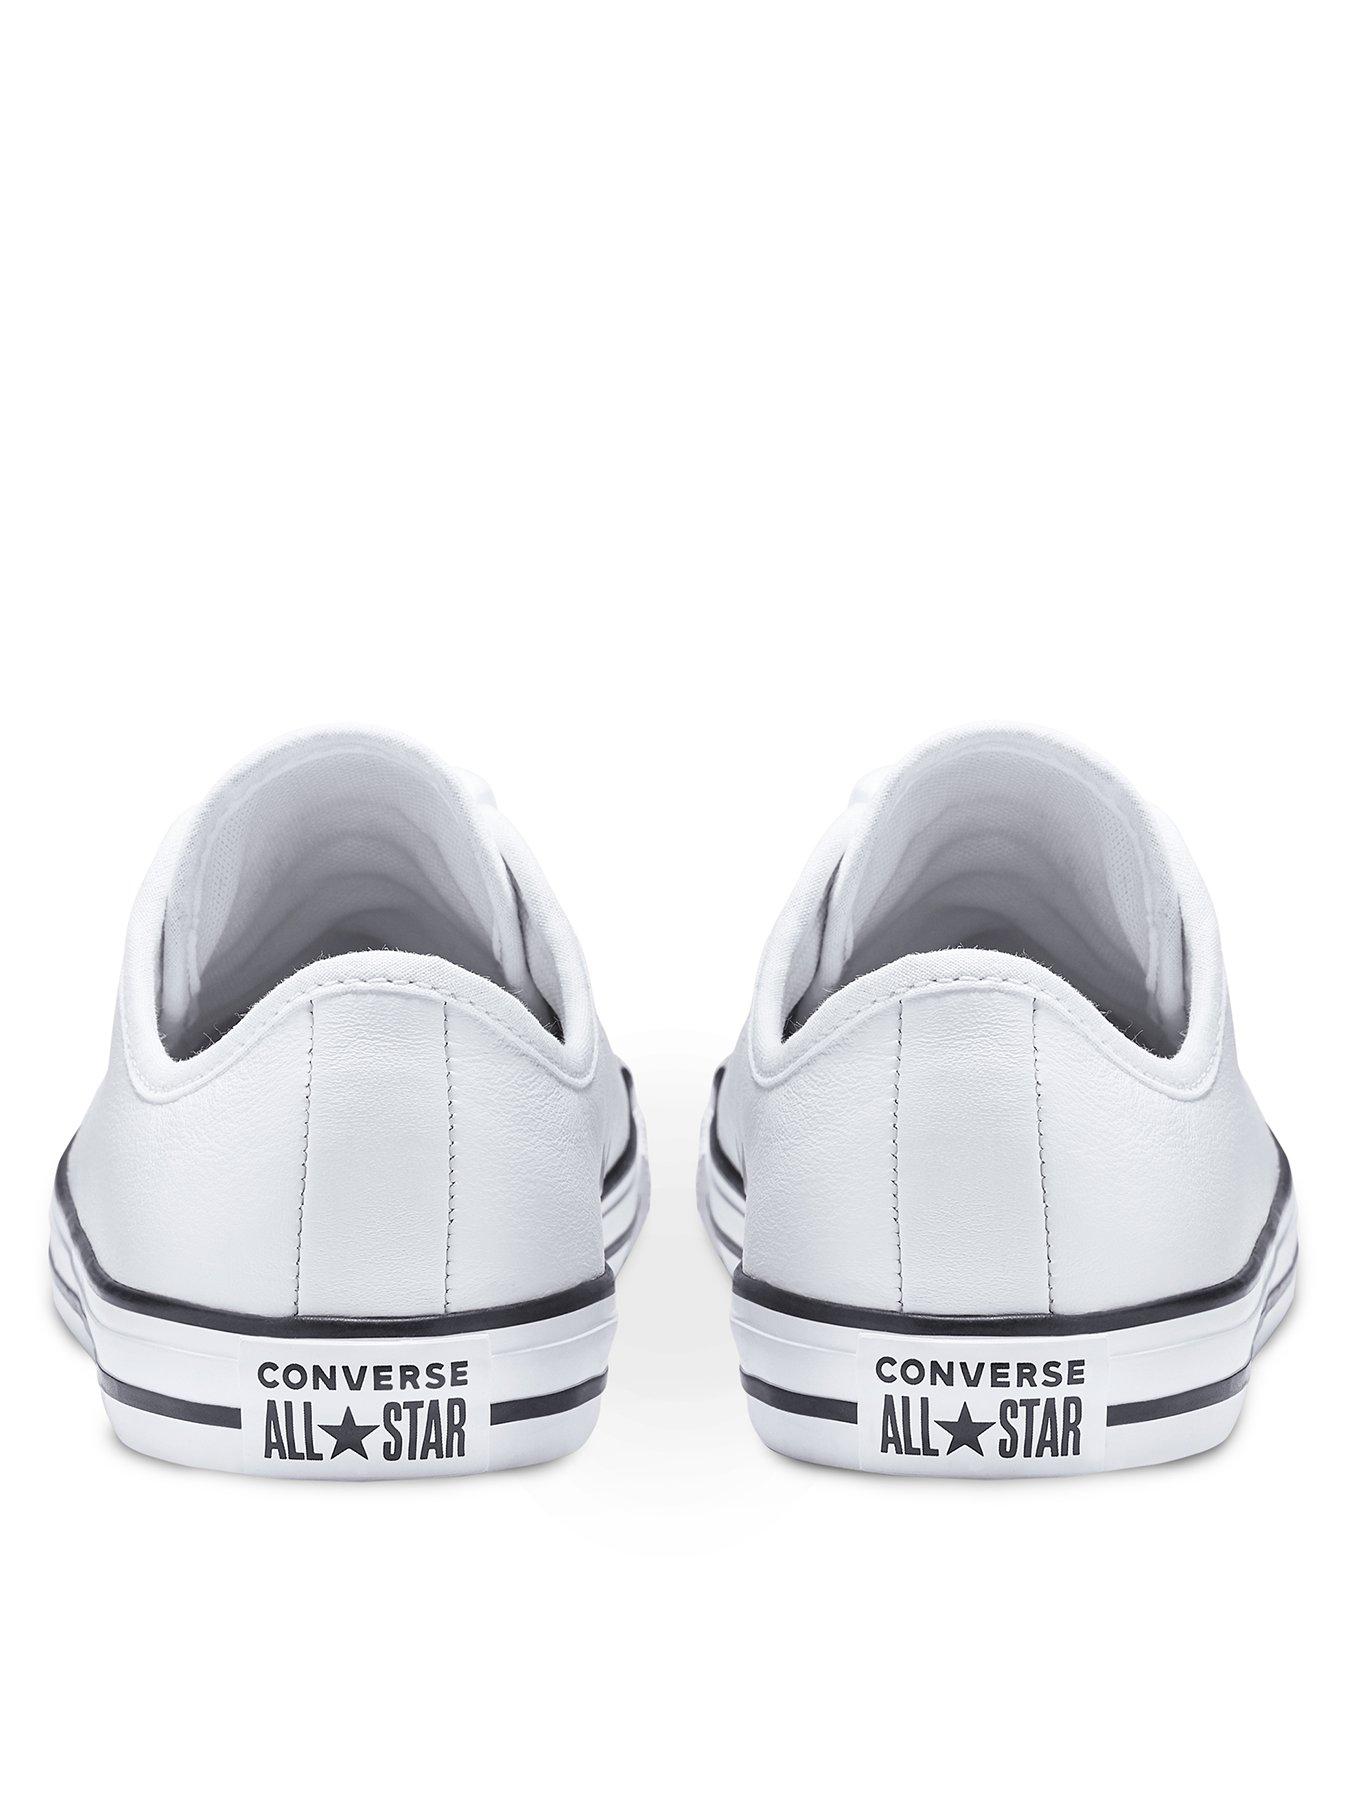 Converse Chuck Taylor All Star Leather Dainty Ox Plimsolls - White |  very.co.uk